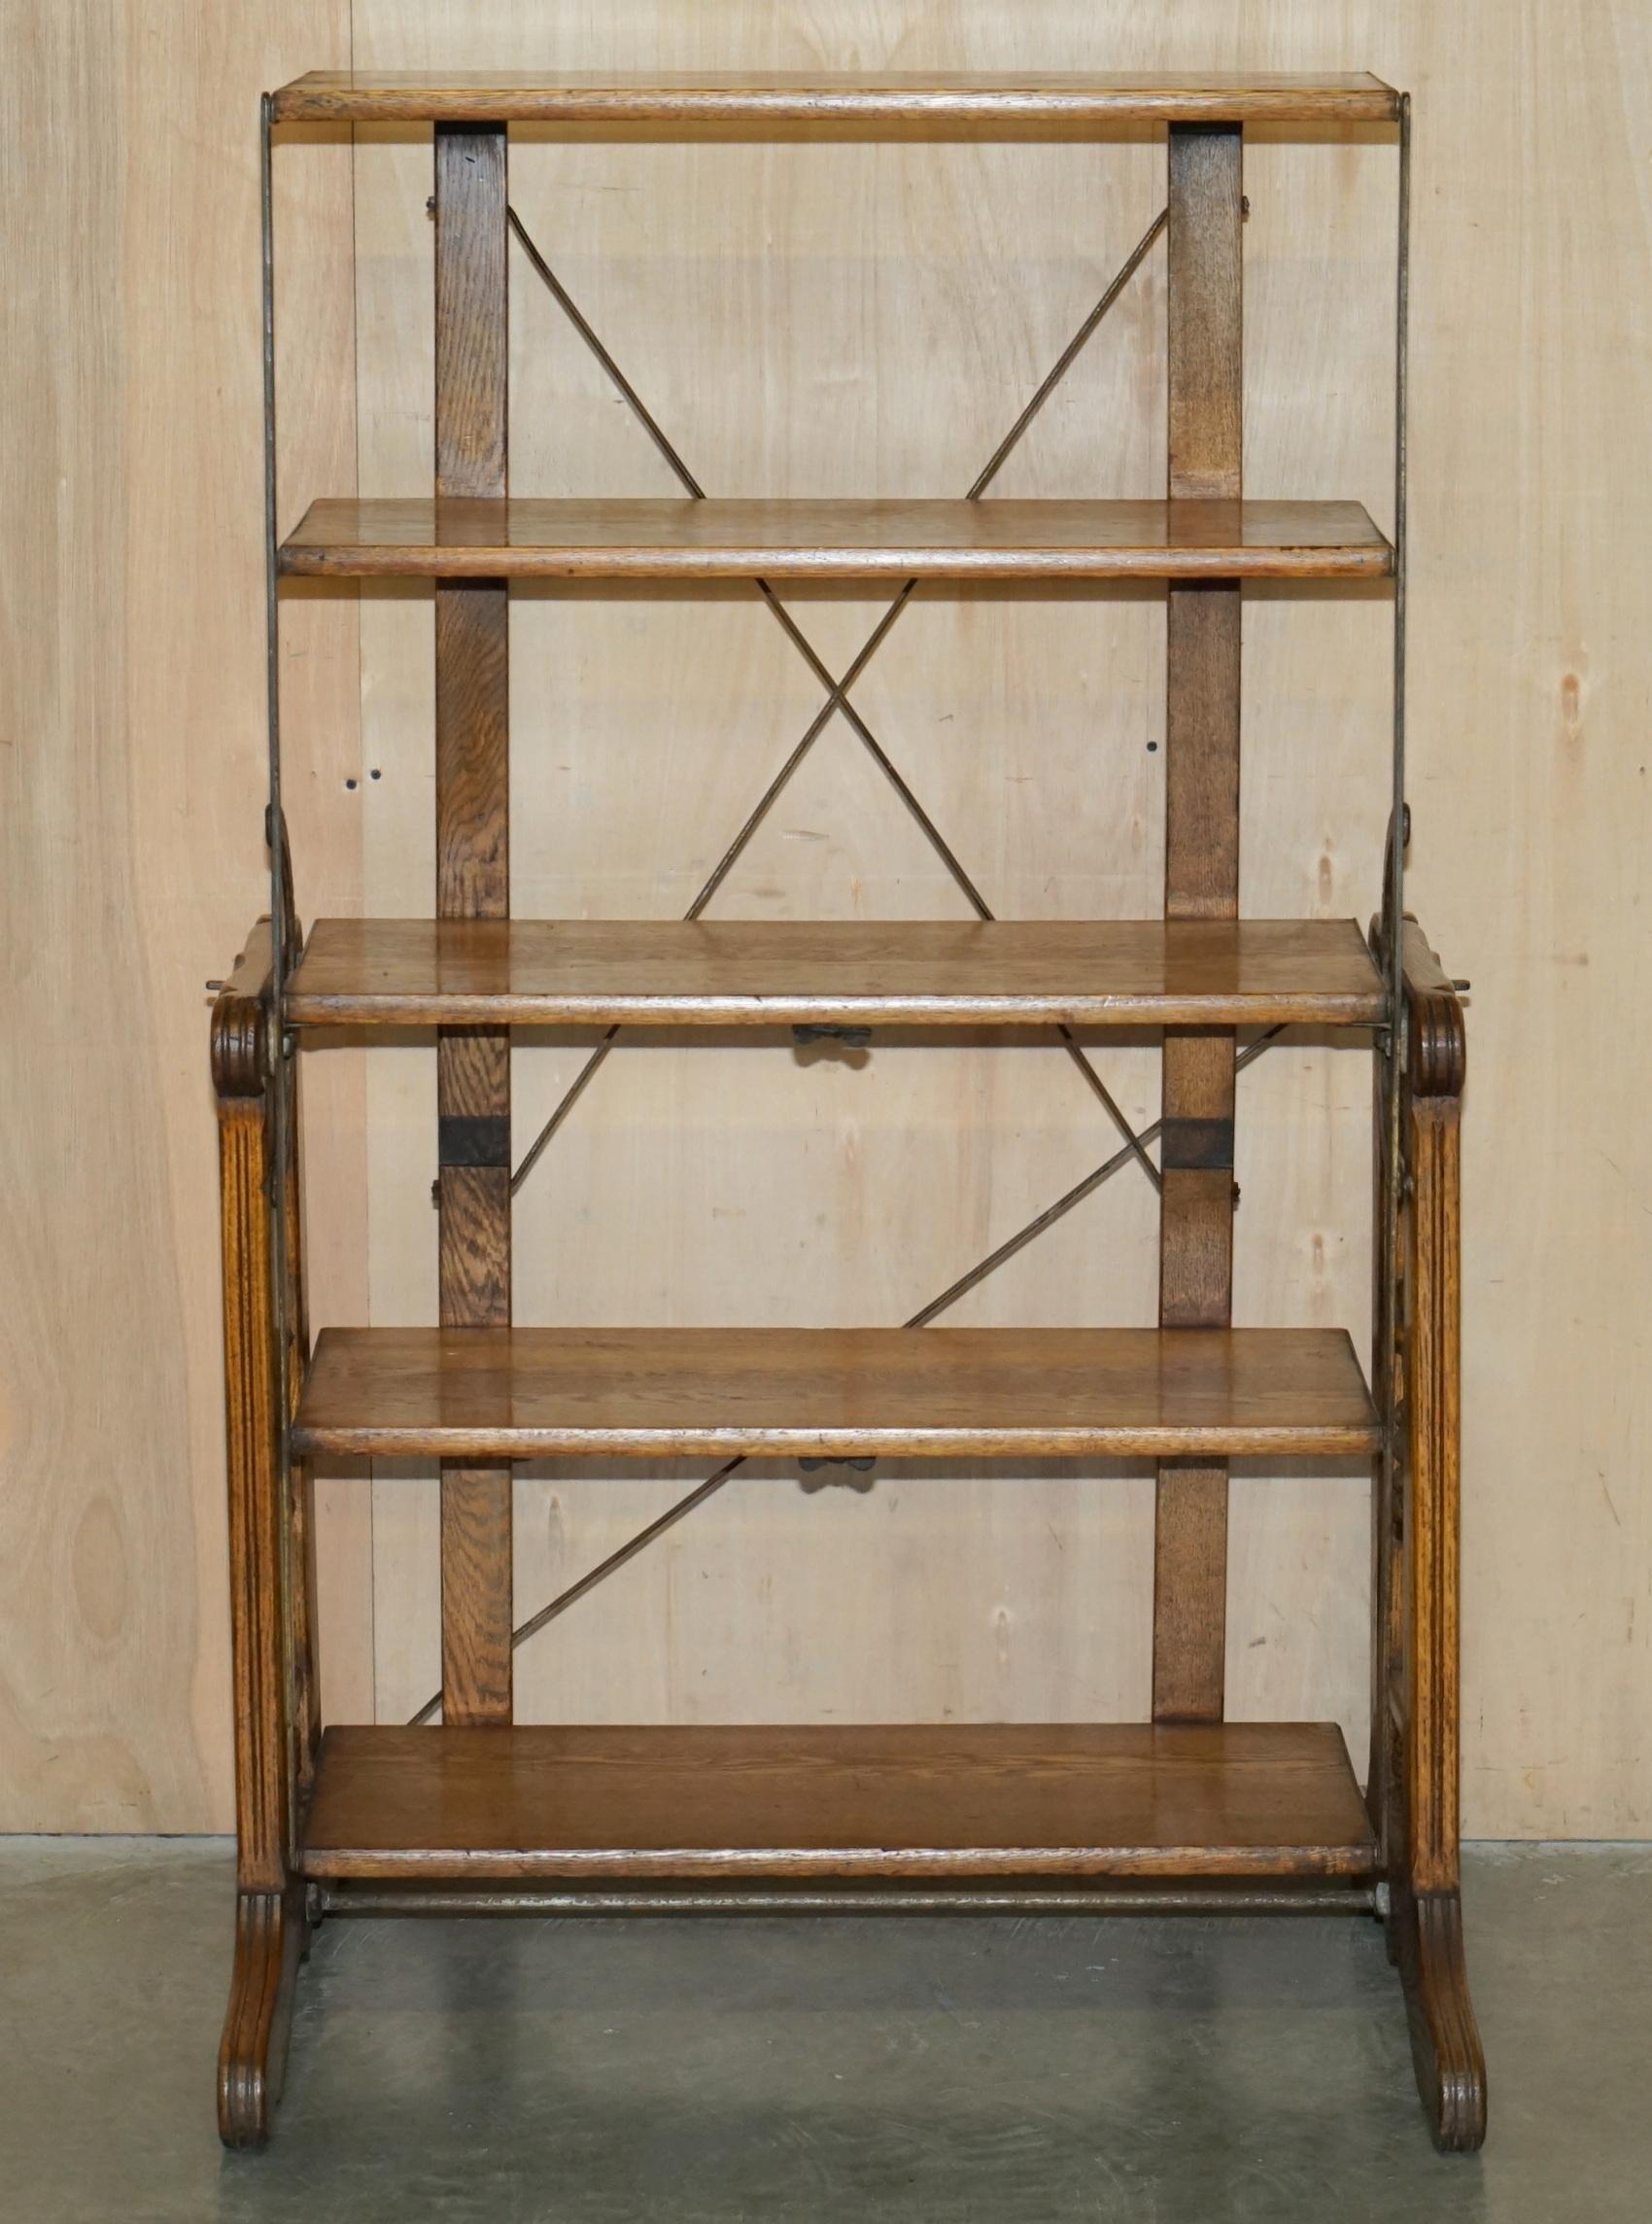 Edwardian FULLY RESTORED CiRCA 1910 BOECKH BROTHERS METAMORPHIC BAKERS TABLE BOOKCASE For Sale